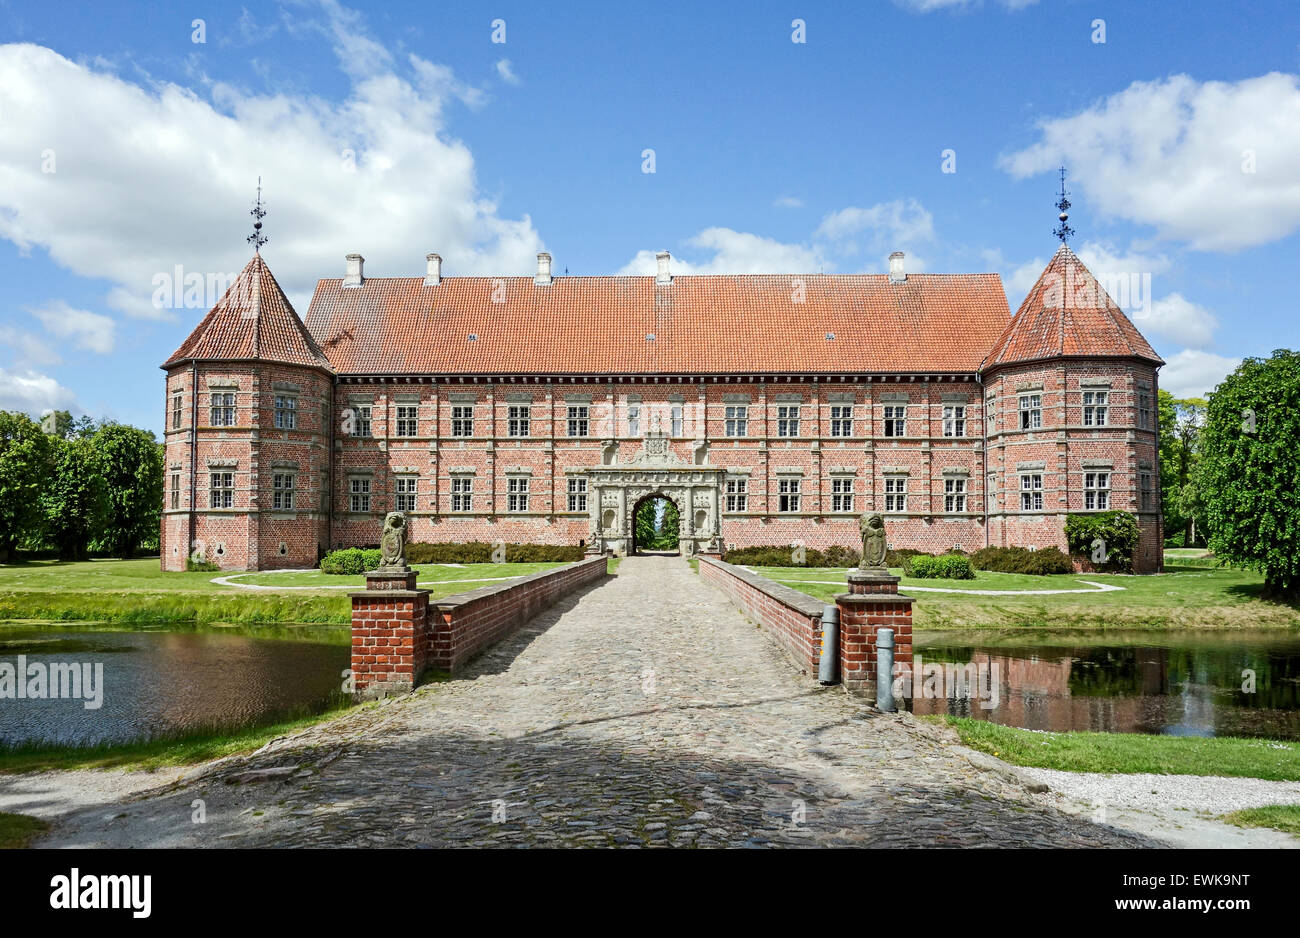 Dronninglund High Resolution Stock Photography and Images - Alamy